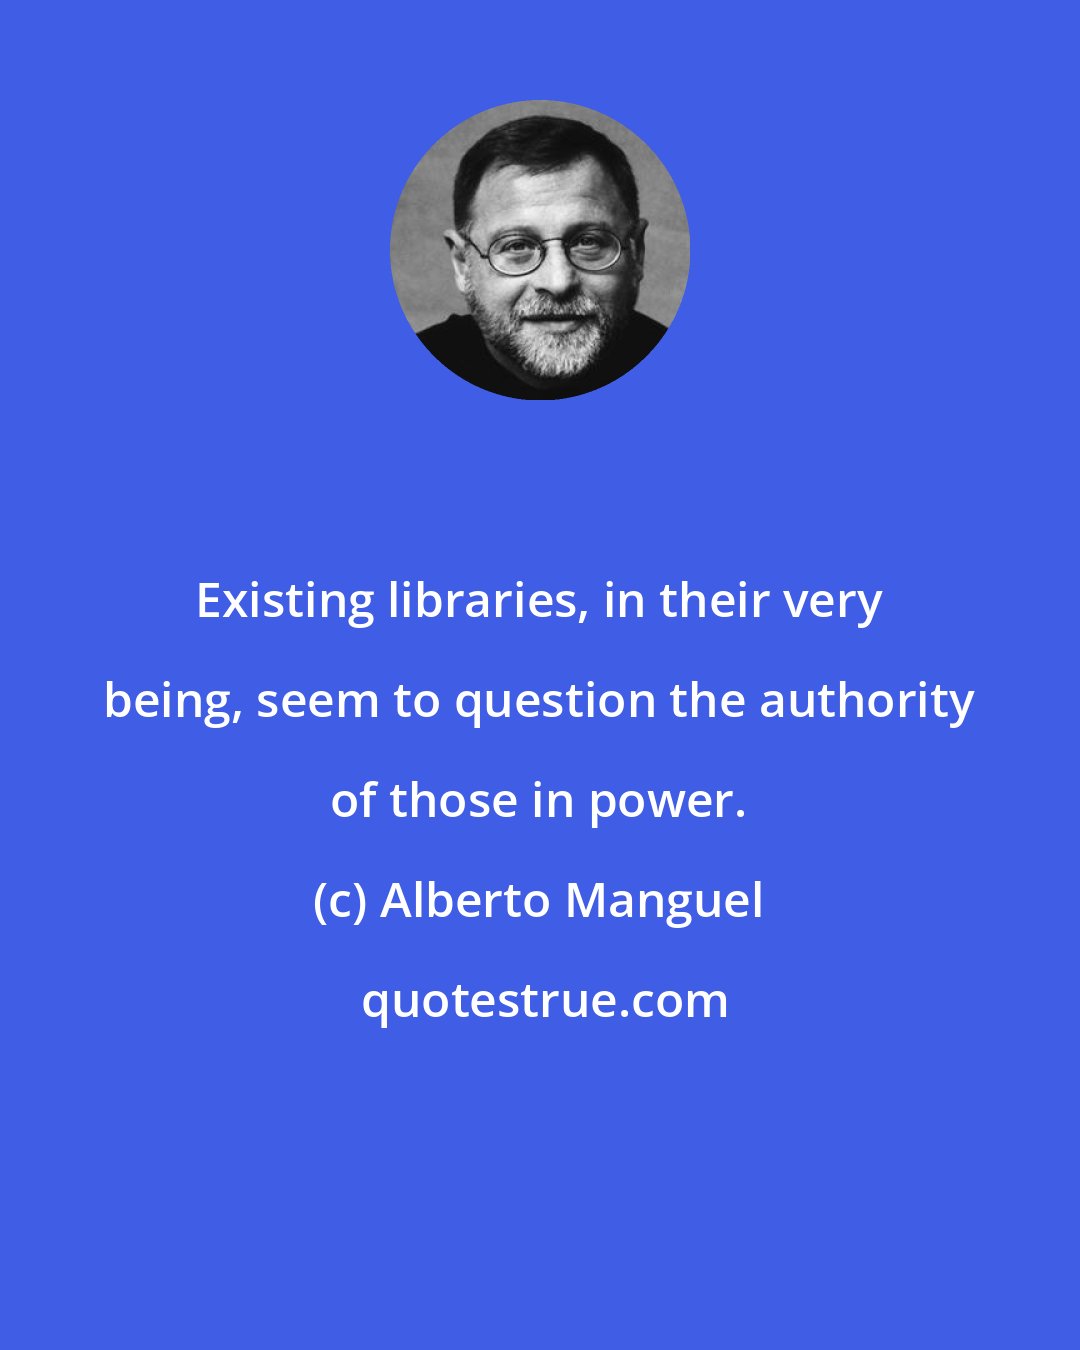 Alberto Manguel: Existing libraries, in their very being, seem to question the authority of those in power.